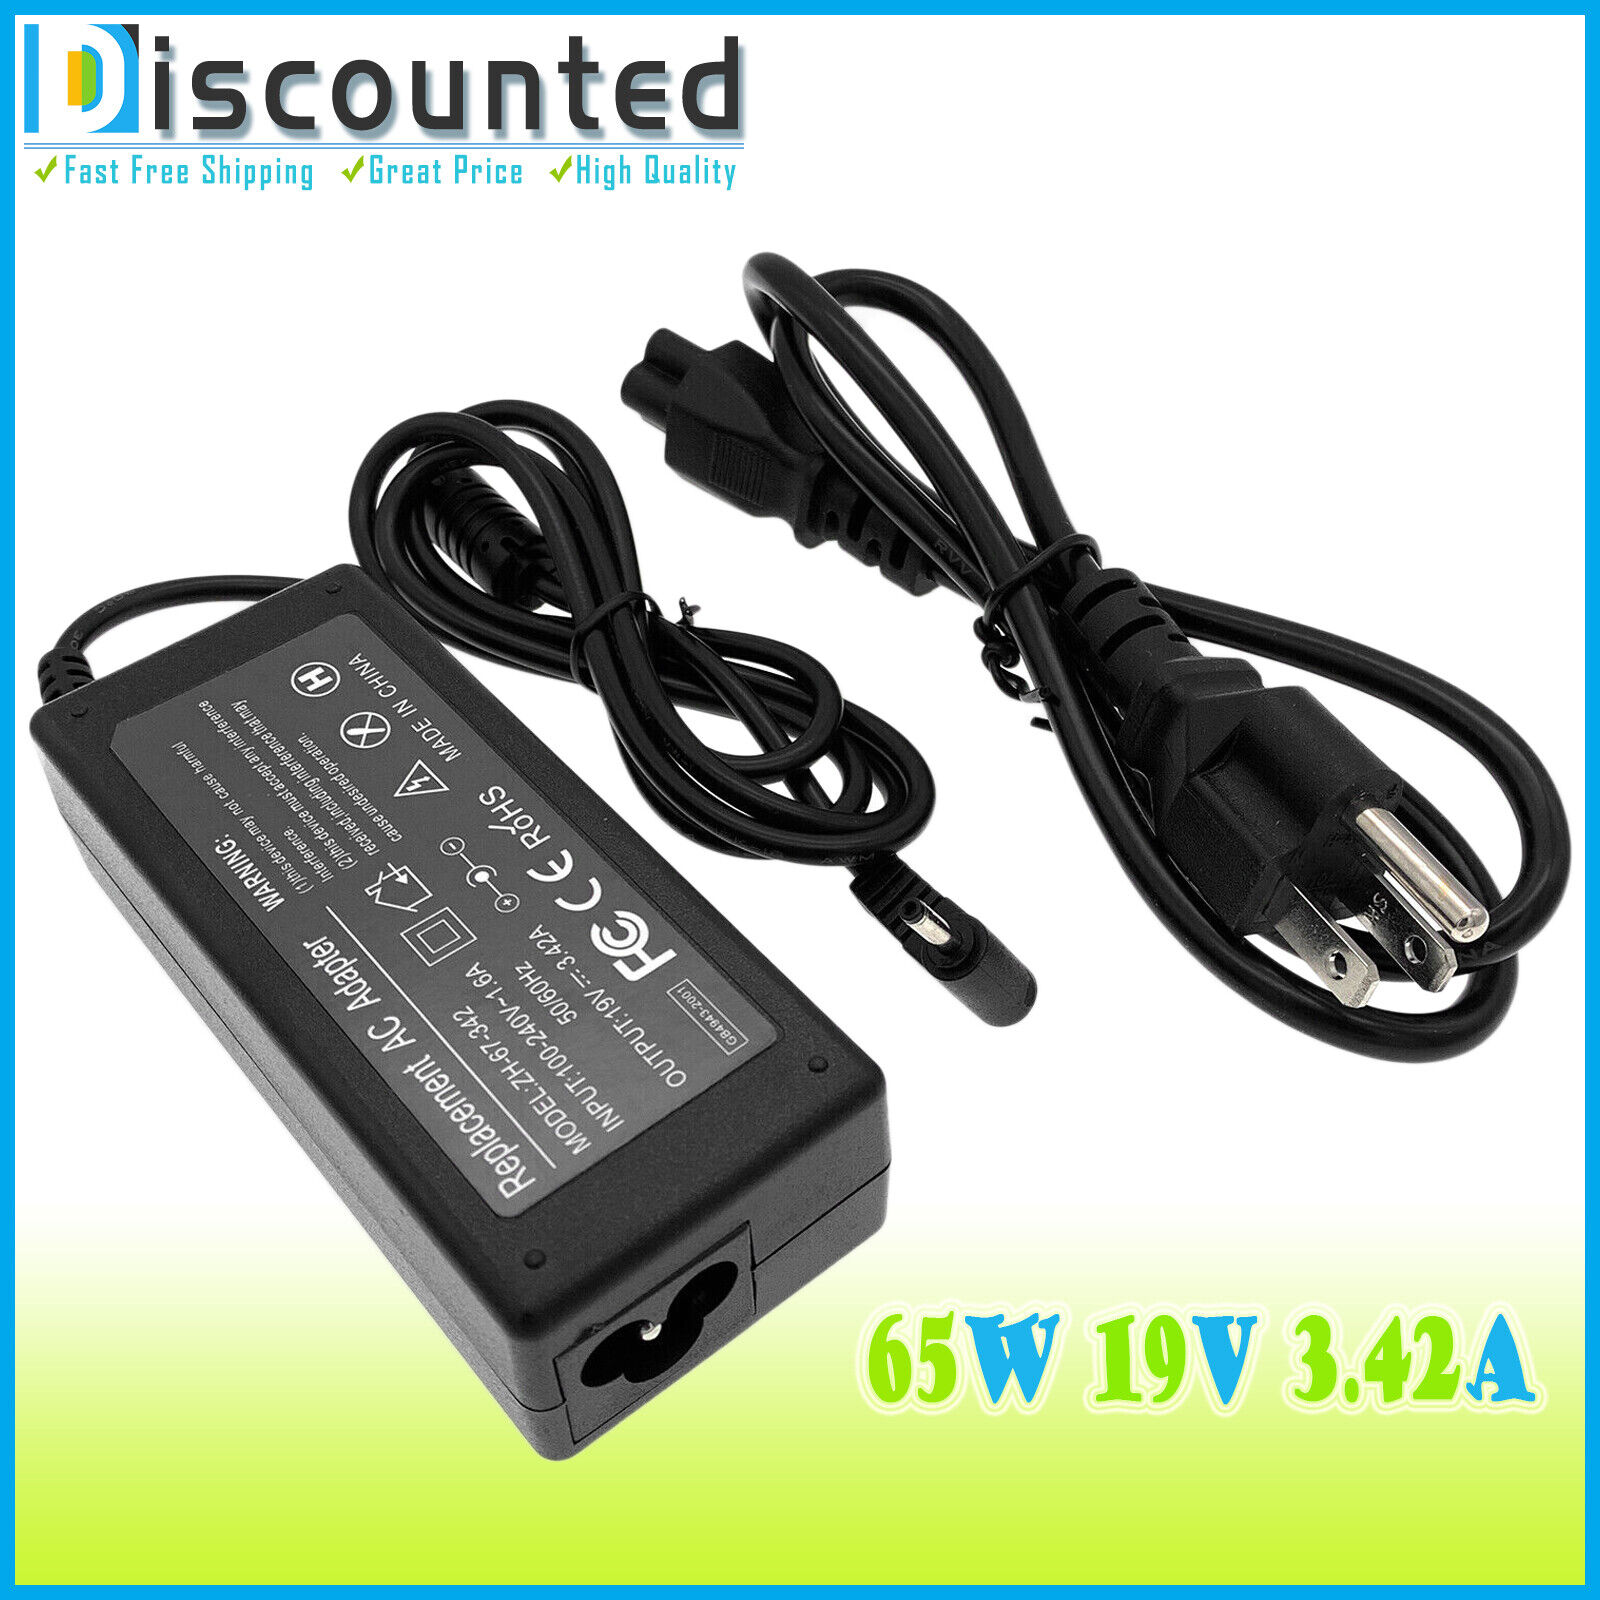 Lite-On 19V 3.42A 65W PA-1650-80 AC Adapter Power Supply Charger for Chromebook